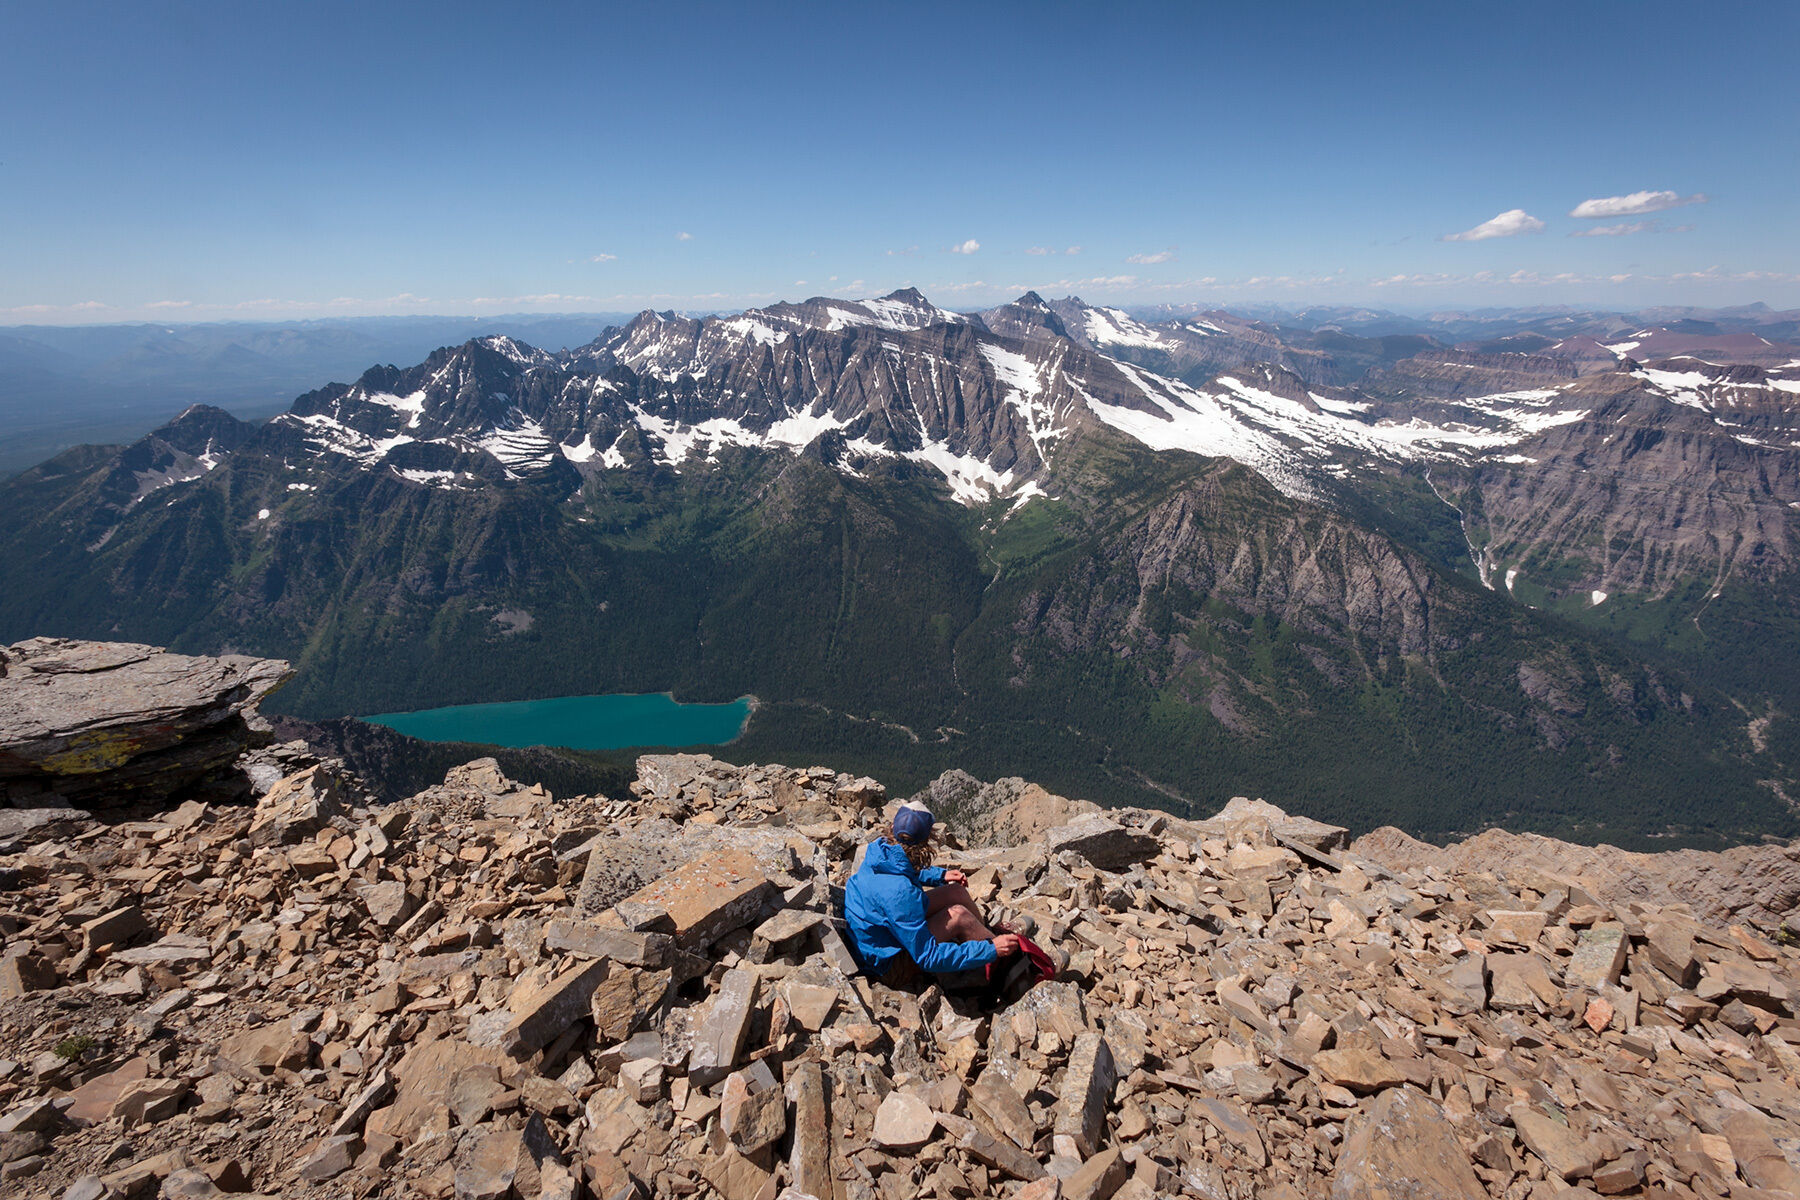 Douglas sitsatop Carter Peak in Glacier National Park, Montana with Bowman lake and snowcapped mountains in the background